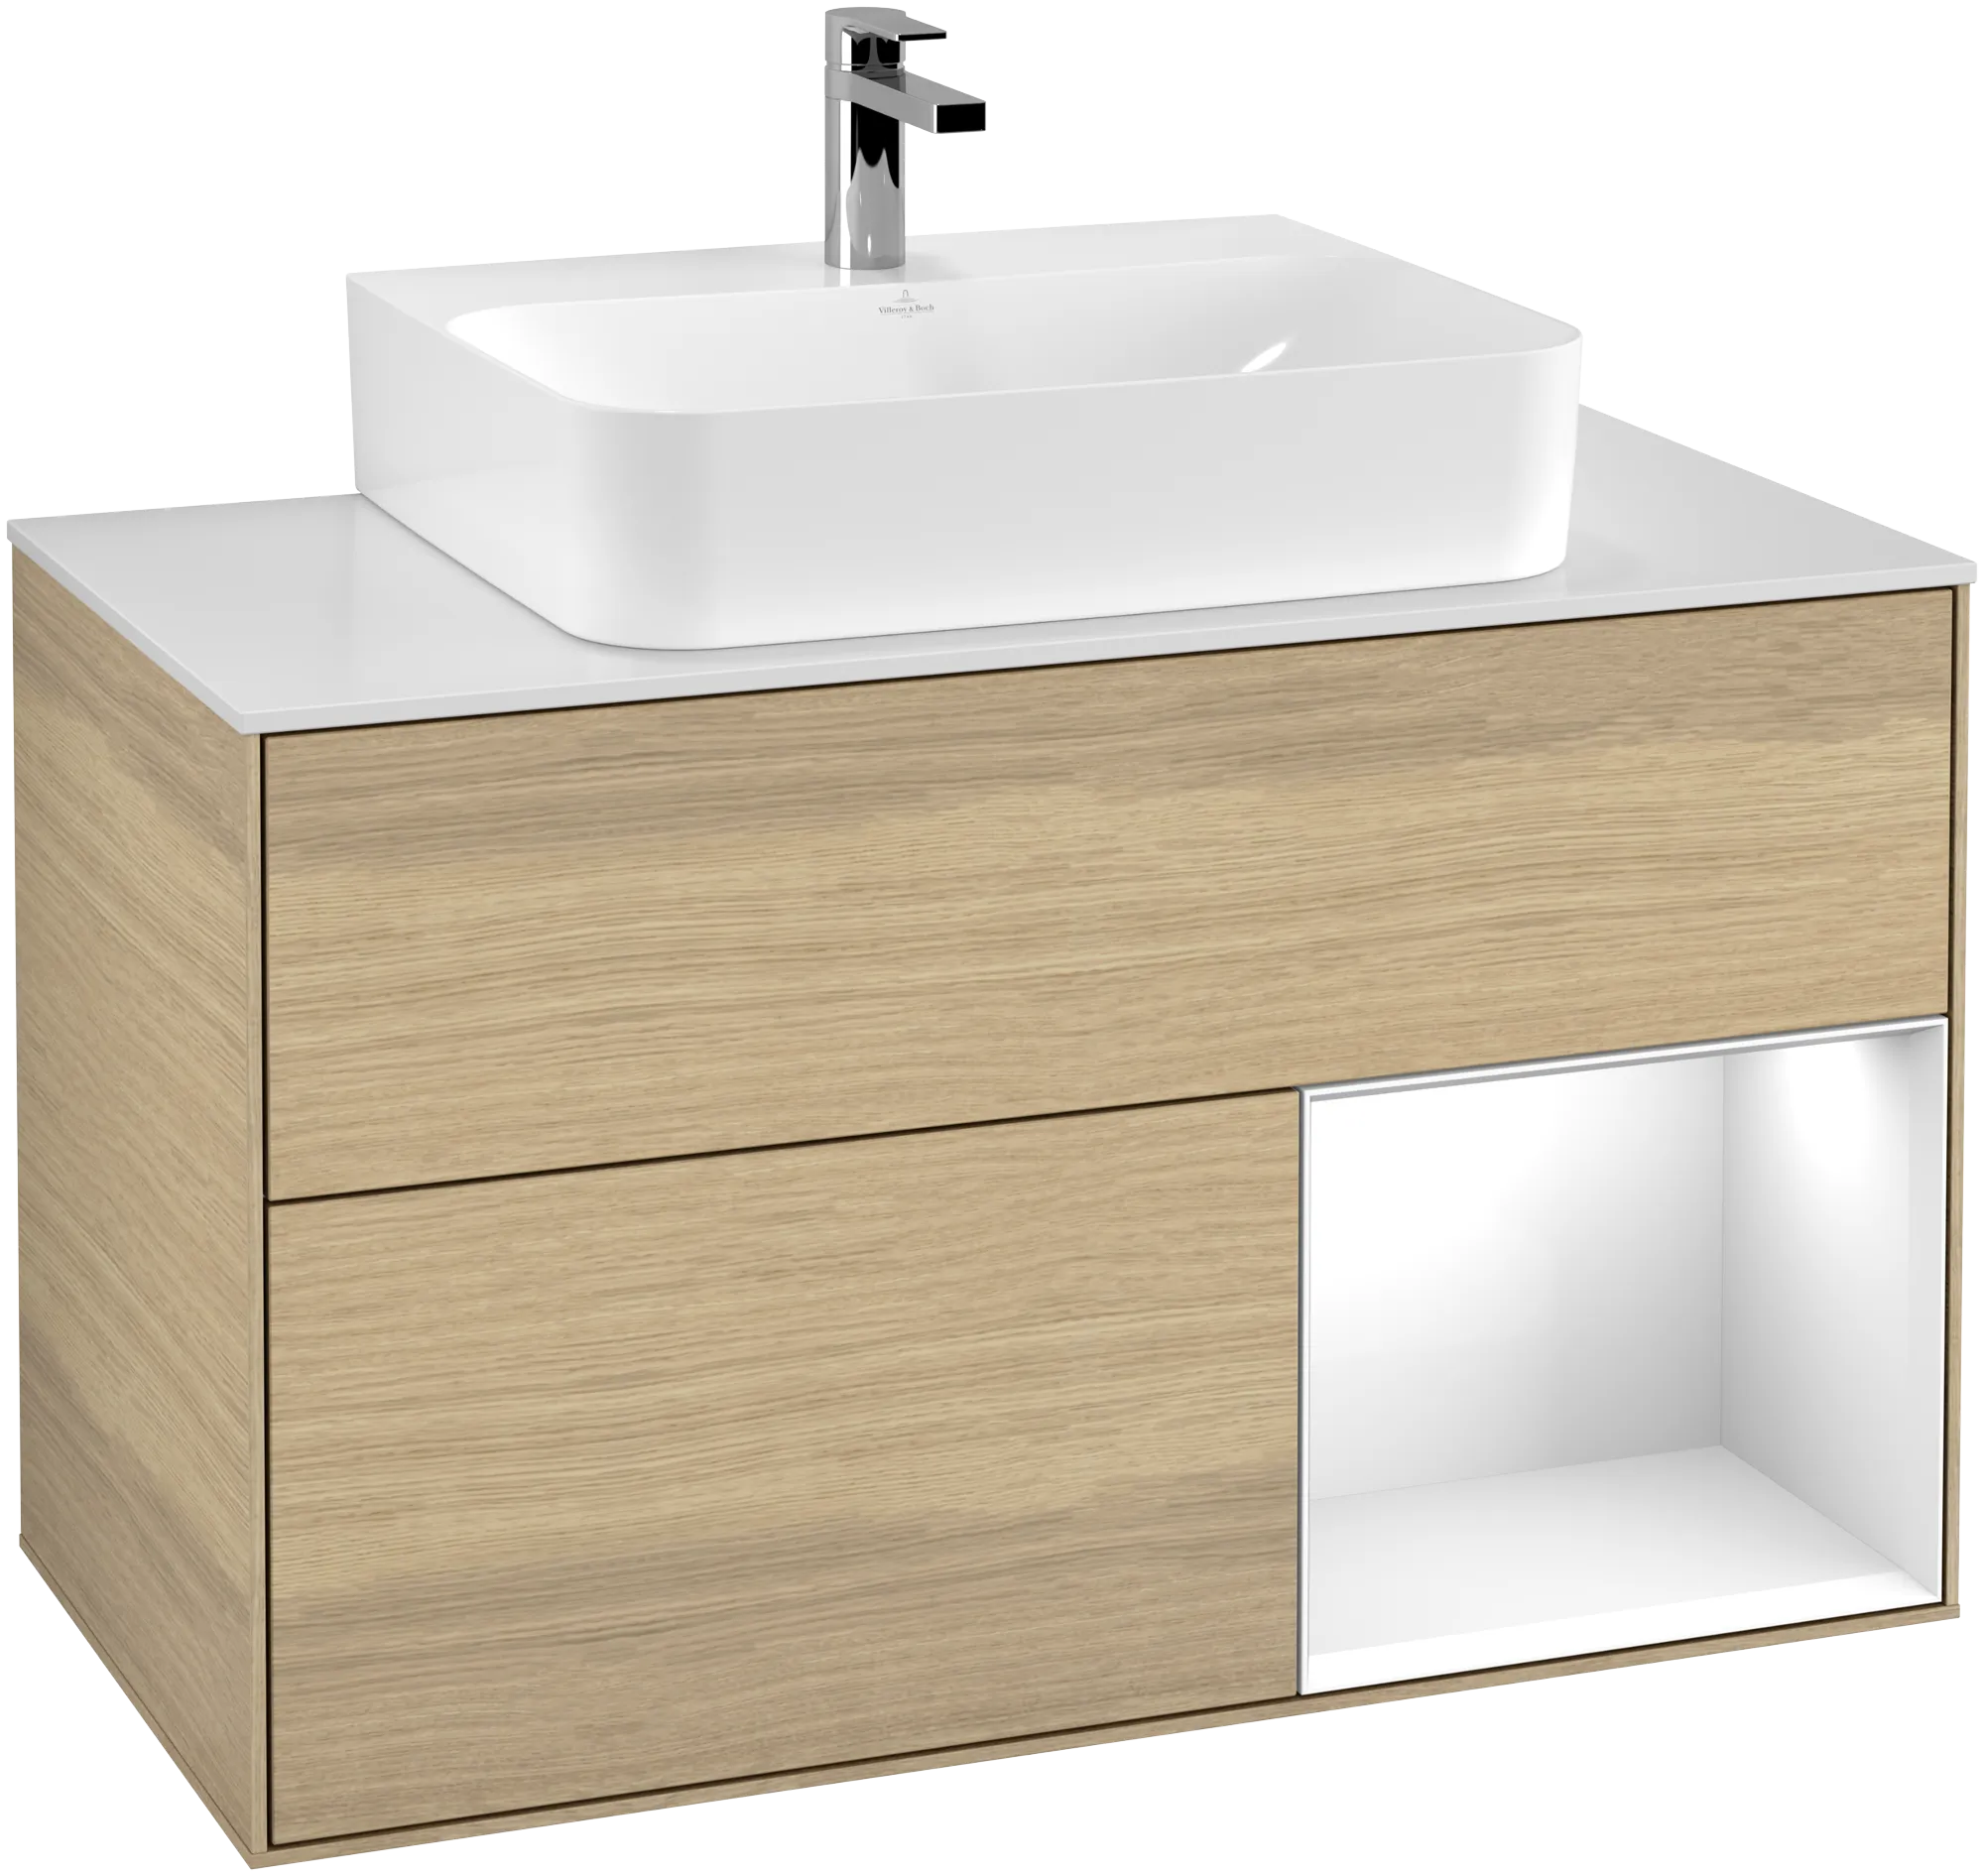 Obrázek VILLEROY BOCH Finion Vanity unit, with lighting, 2 pull-out compartments, 1000 x 603 x 501 mm, Oak Veneer / Glossy White Lacquer / Glass White Matt #G121GFPC